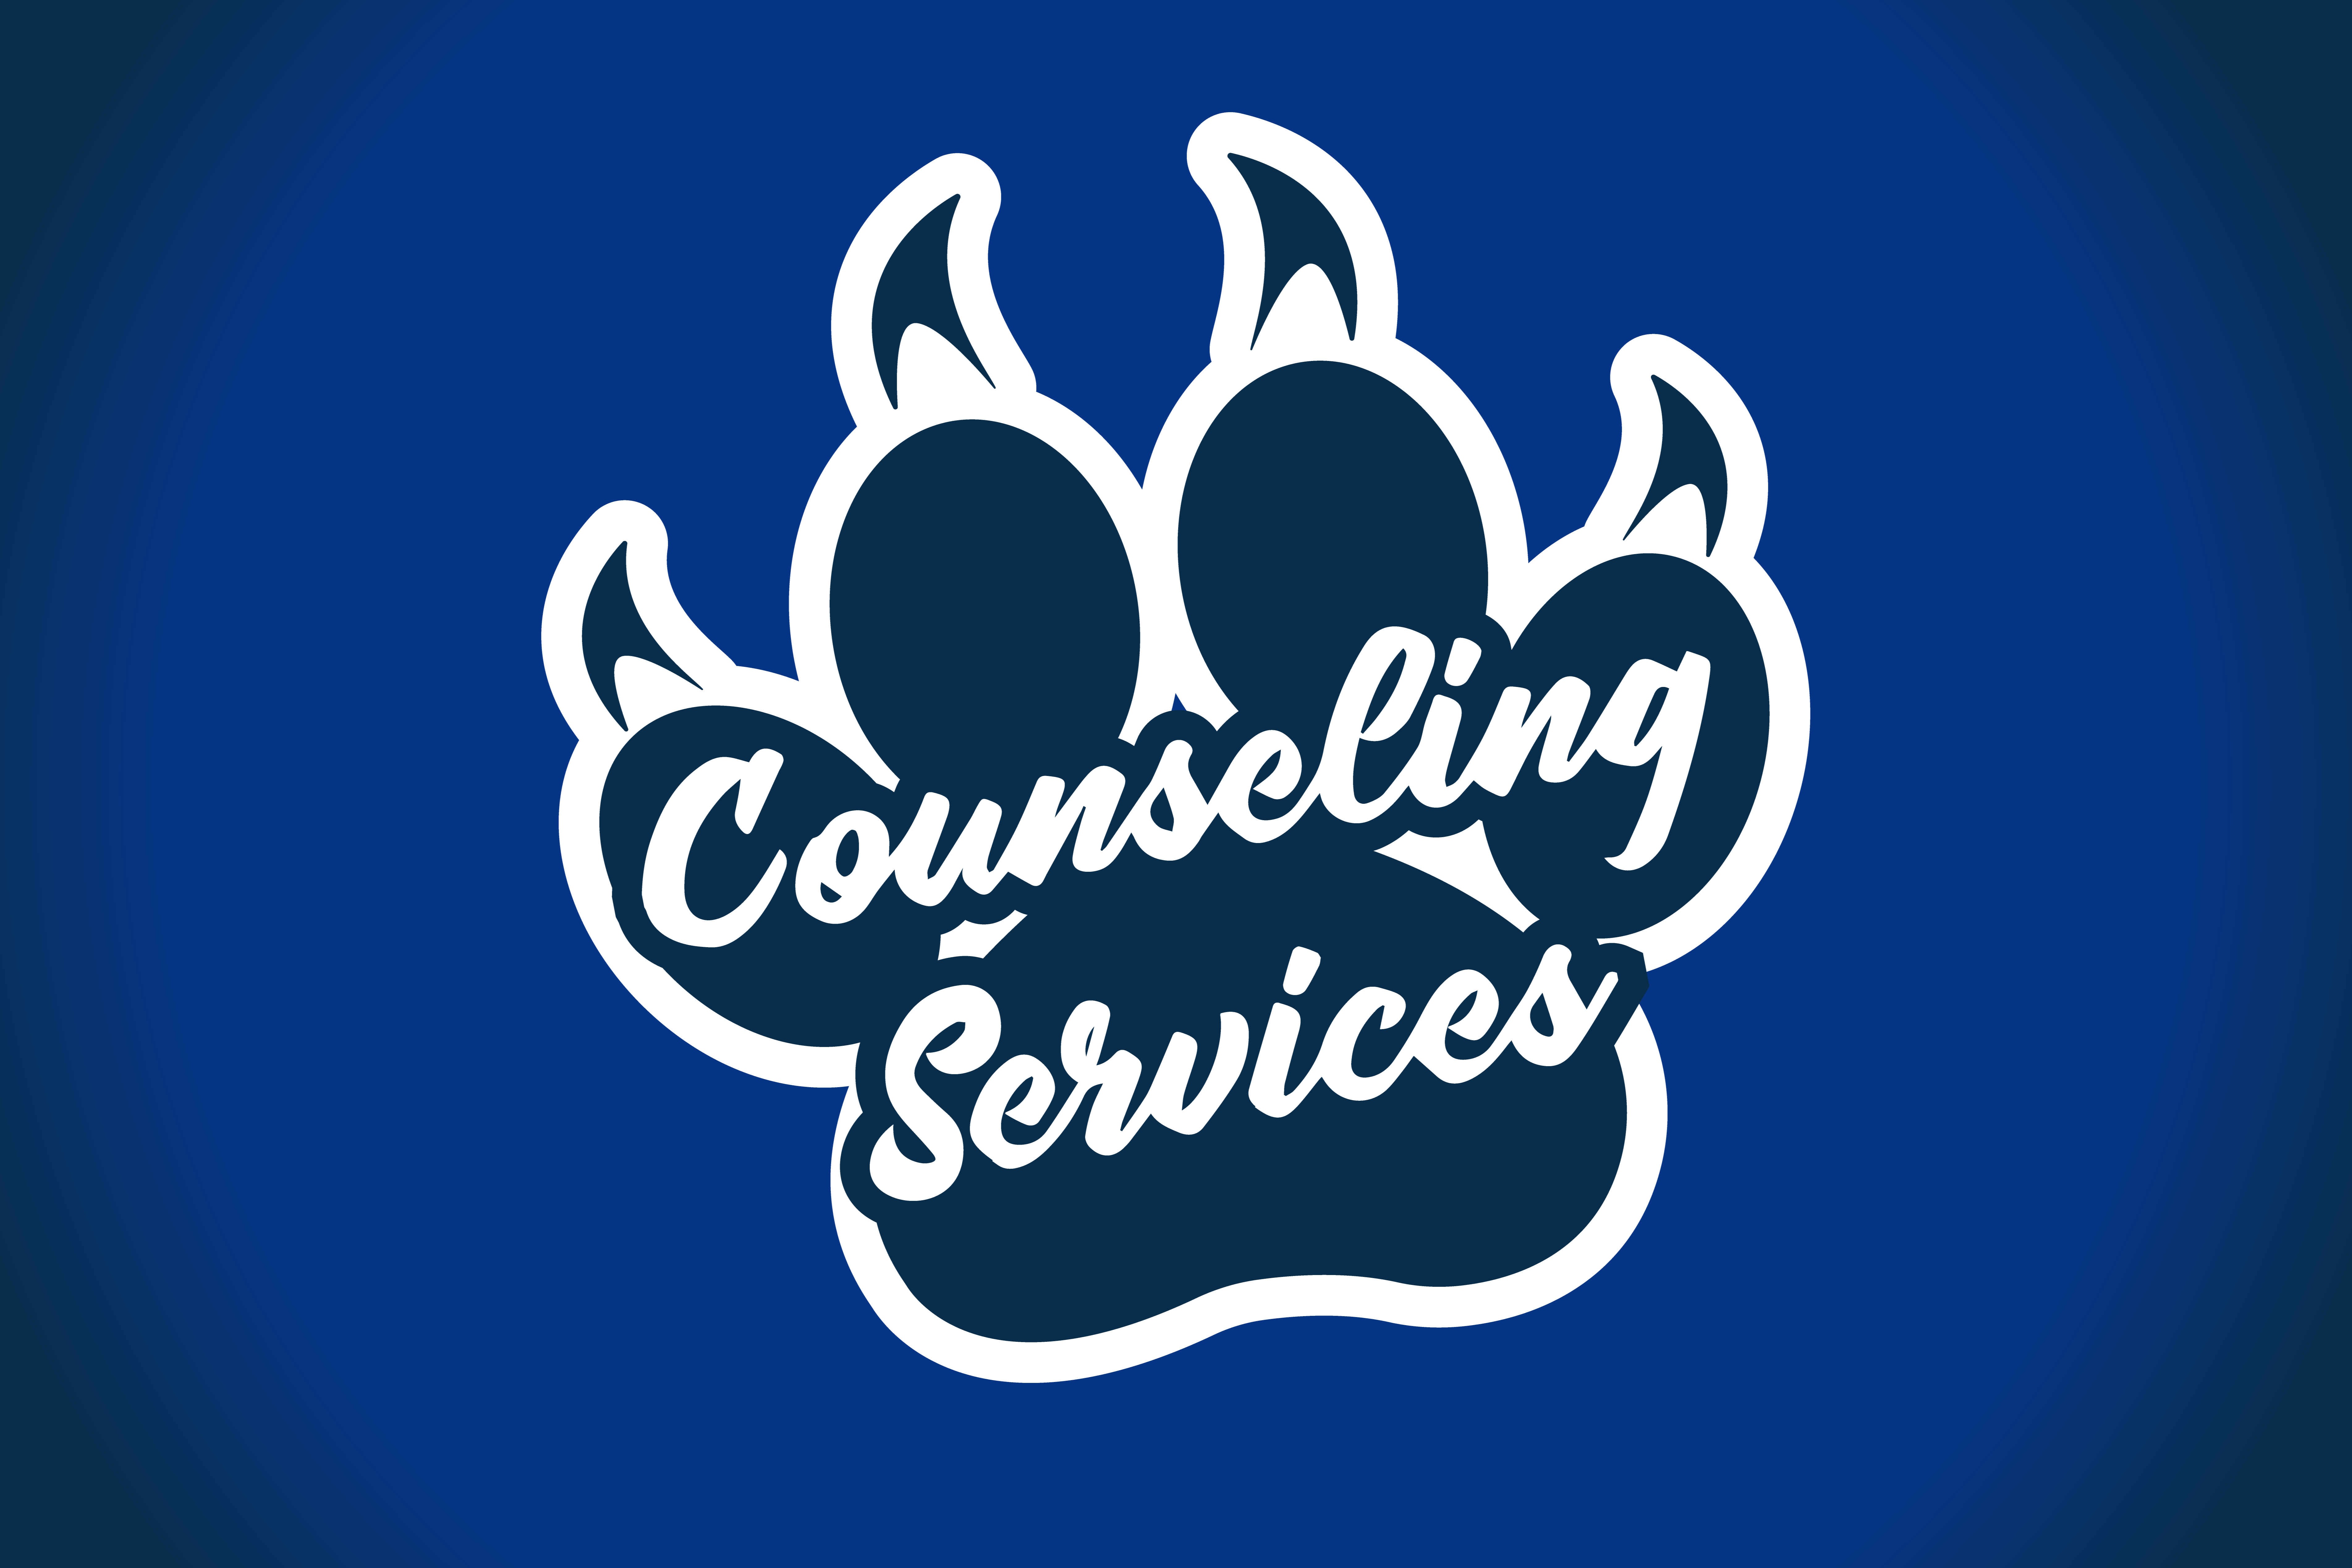 Counseling Services image of paw